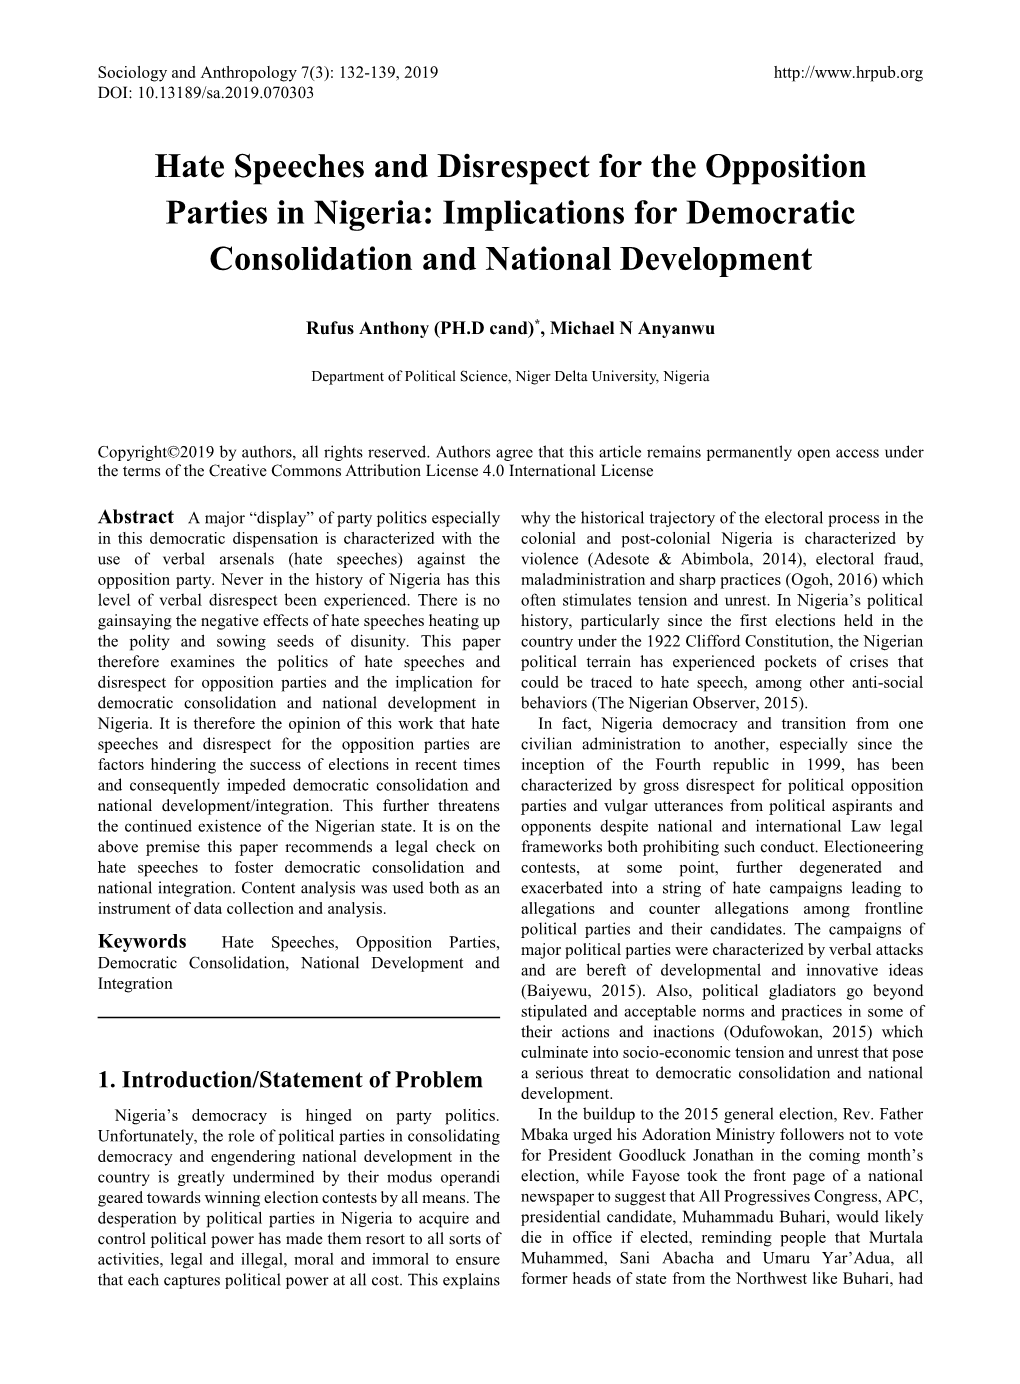 Hate Speeches and Disrespect for the Opposition Parties in Nigeria: Implications for Democratic Consolidation and National Development